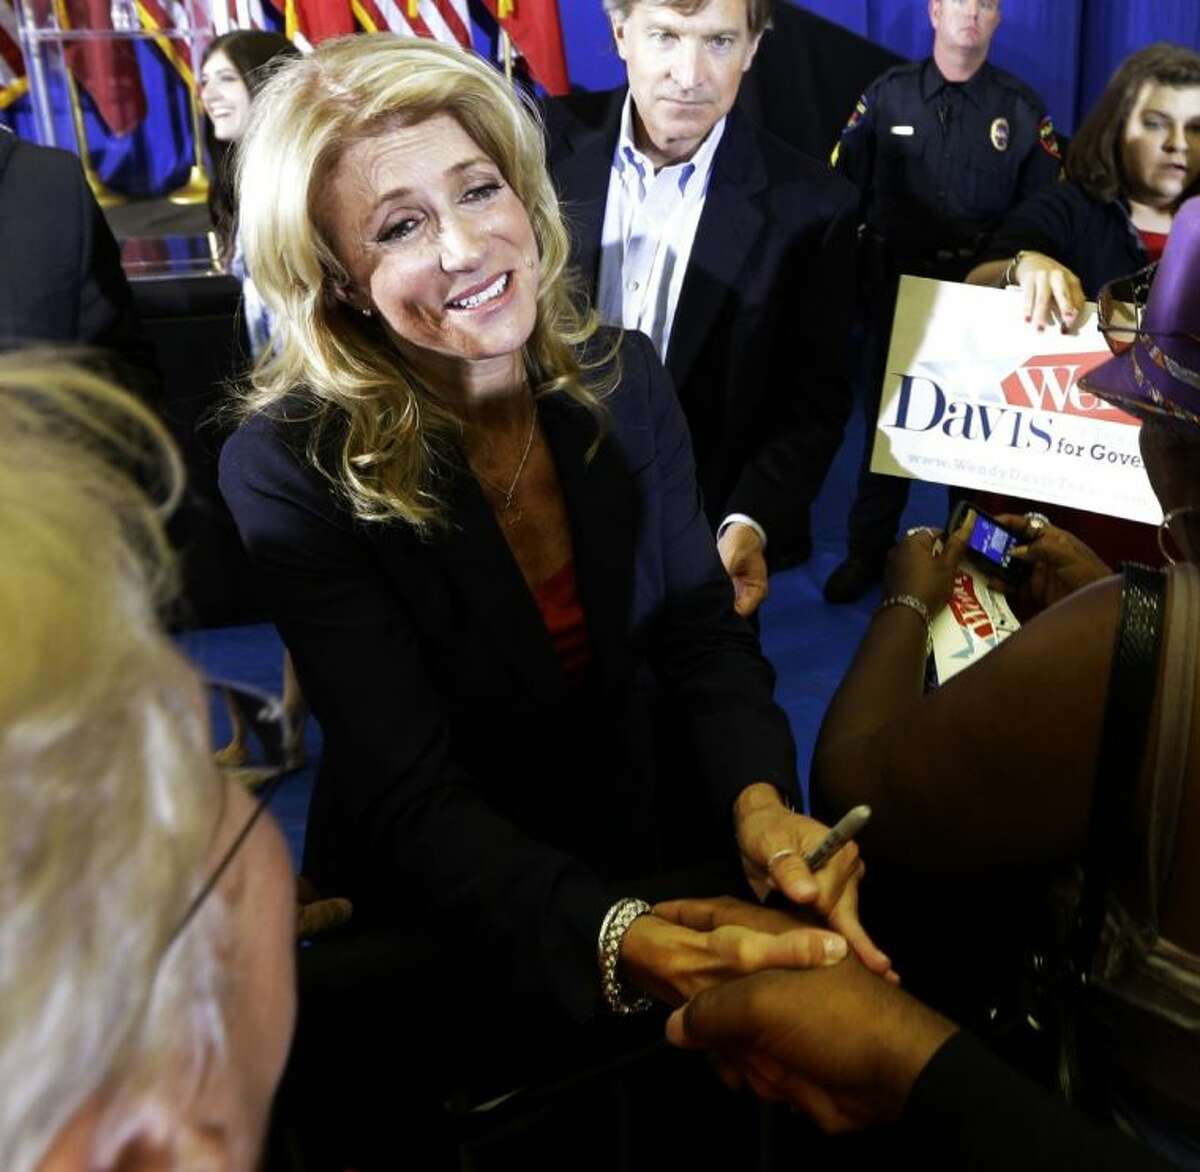 Sen. Wendy Davis, D-Fort Worth, shakes hands with a supporter after a rally Thursday in Haltom City. Davis formally announced her campaign to run for Texas governor.